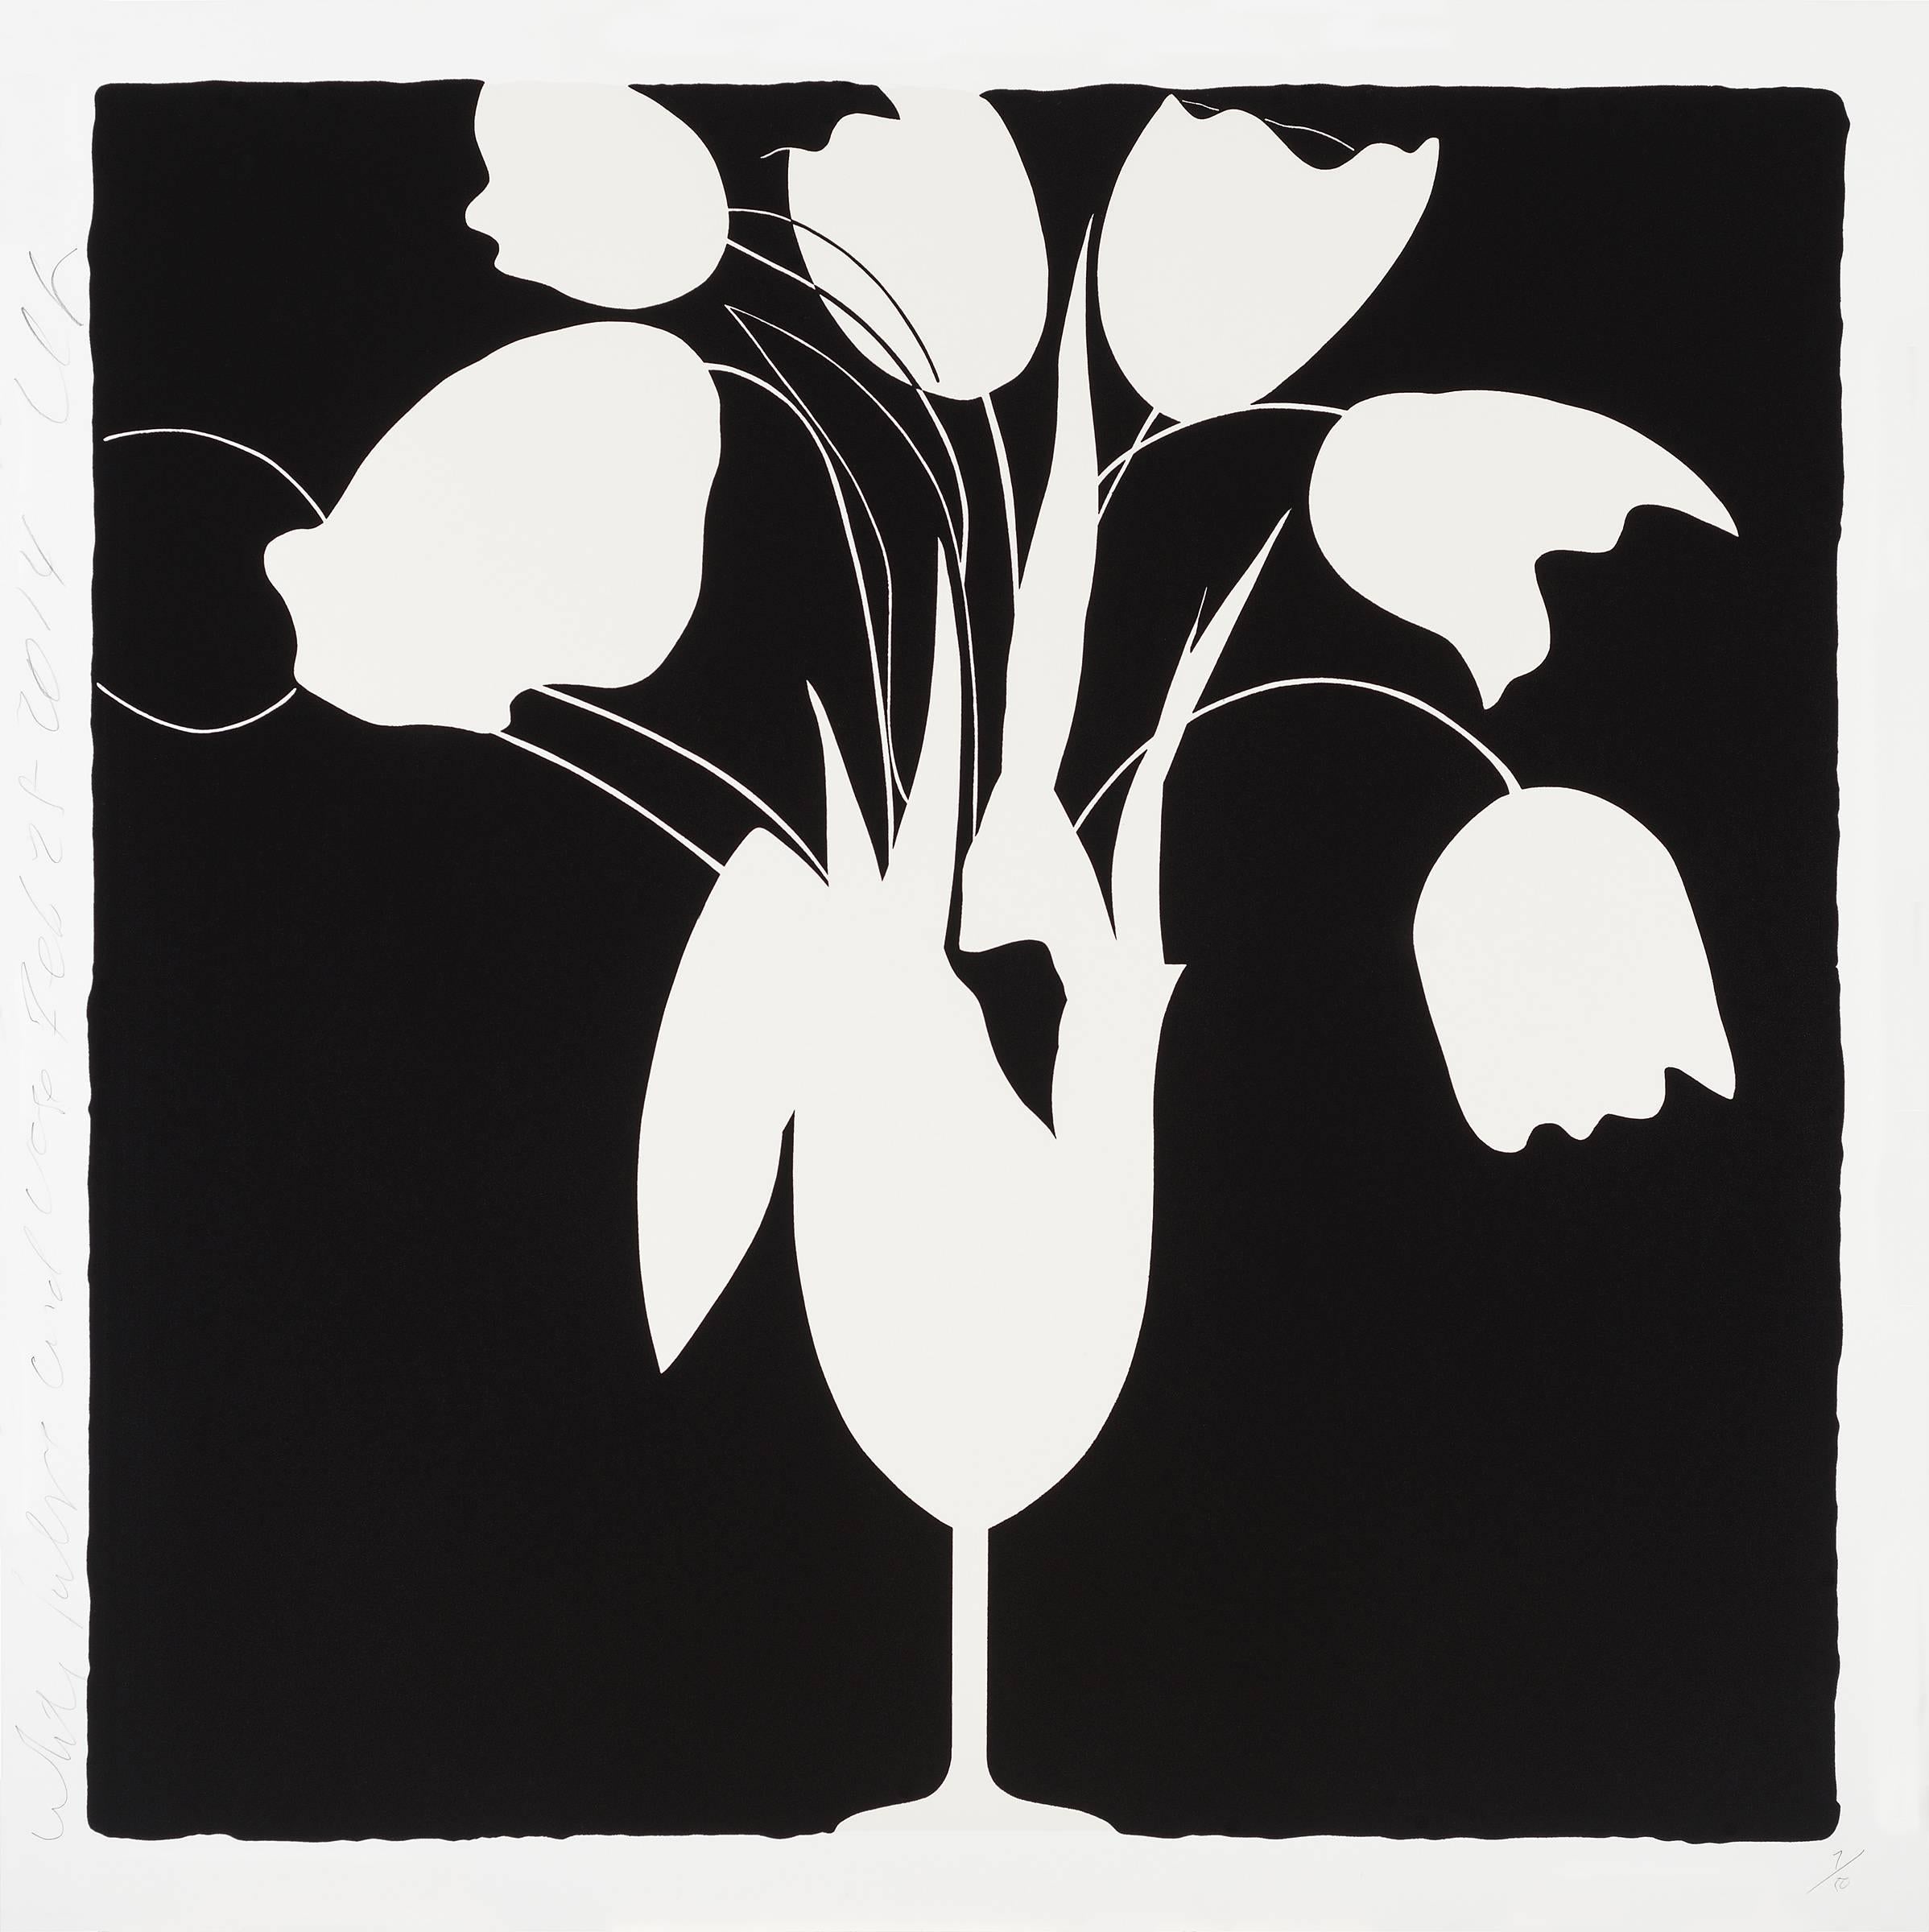 Black Tulips and Vase, White Tulips and Vase  - Print by Donald Sultan